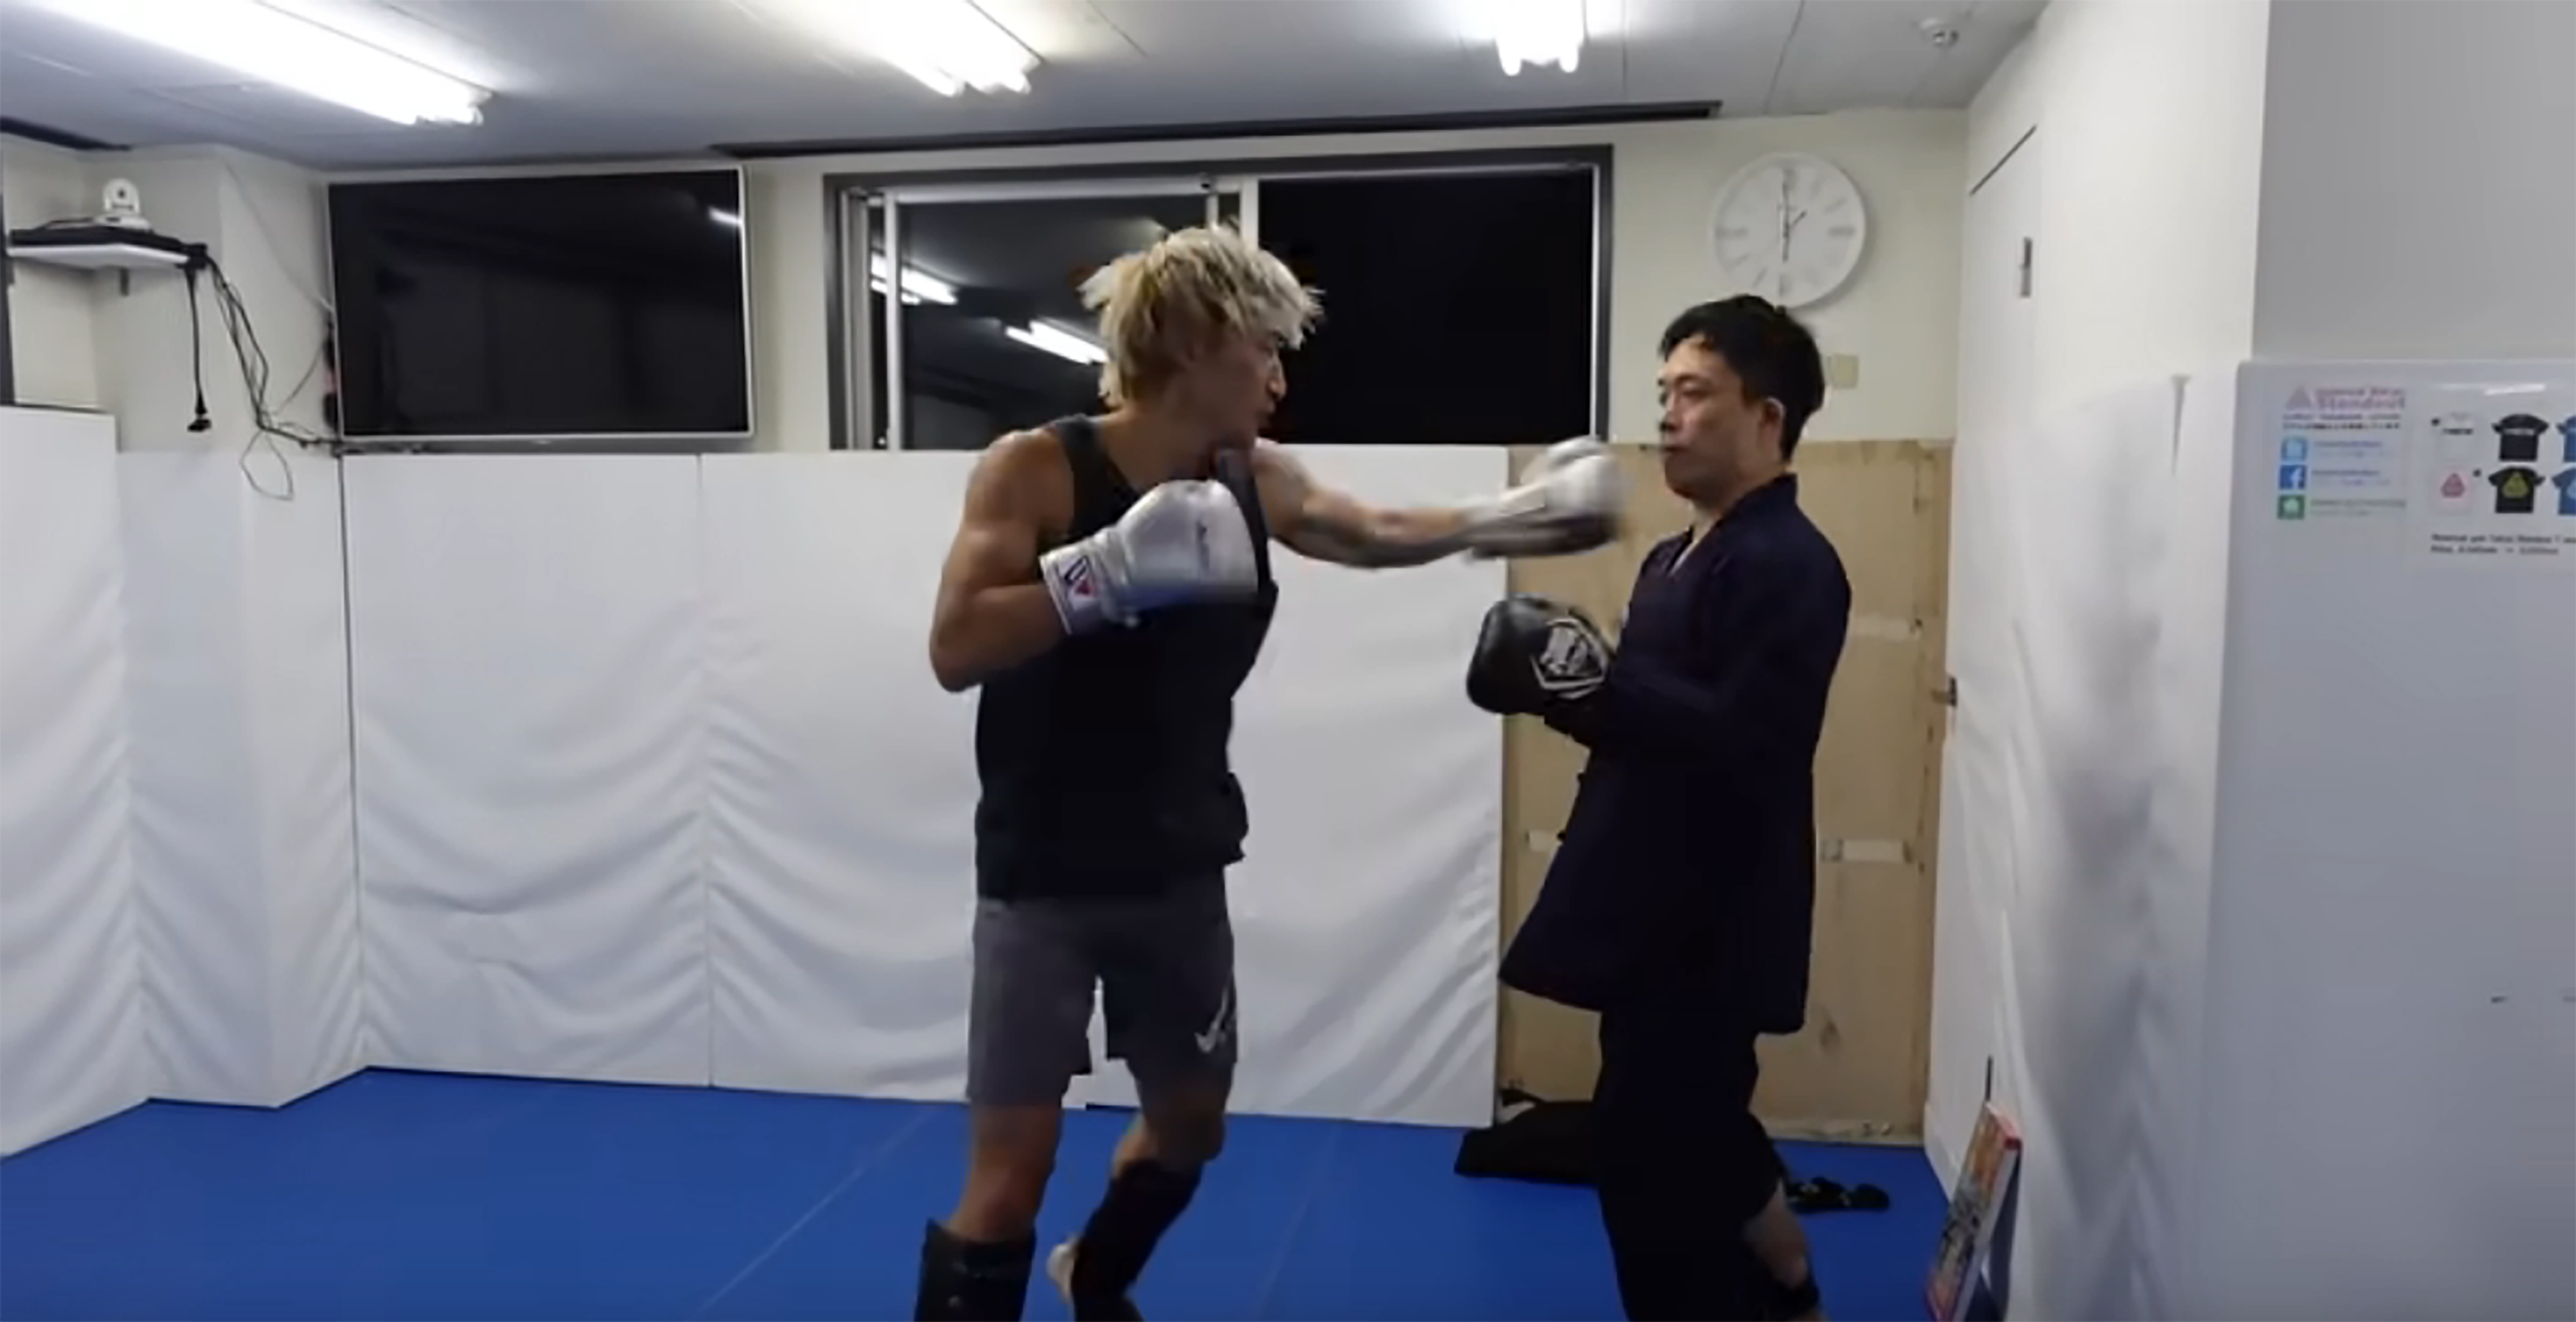 Video: ‘Kung Fu master’ calls out K-1 champion, gets destroyed